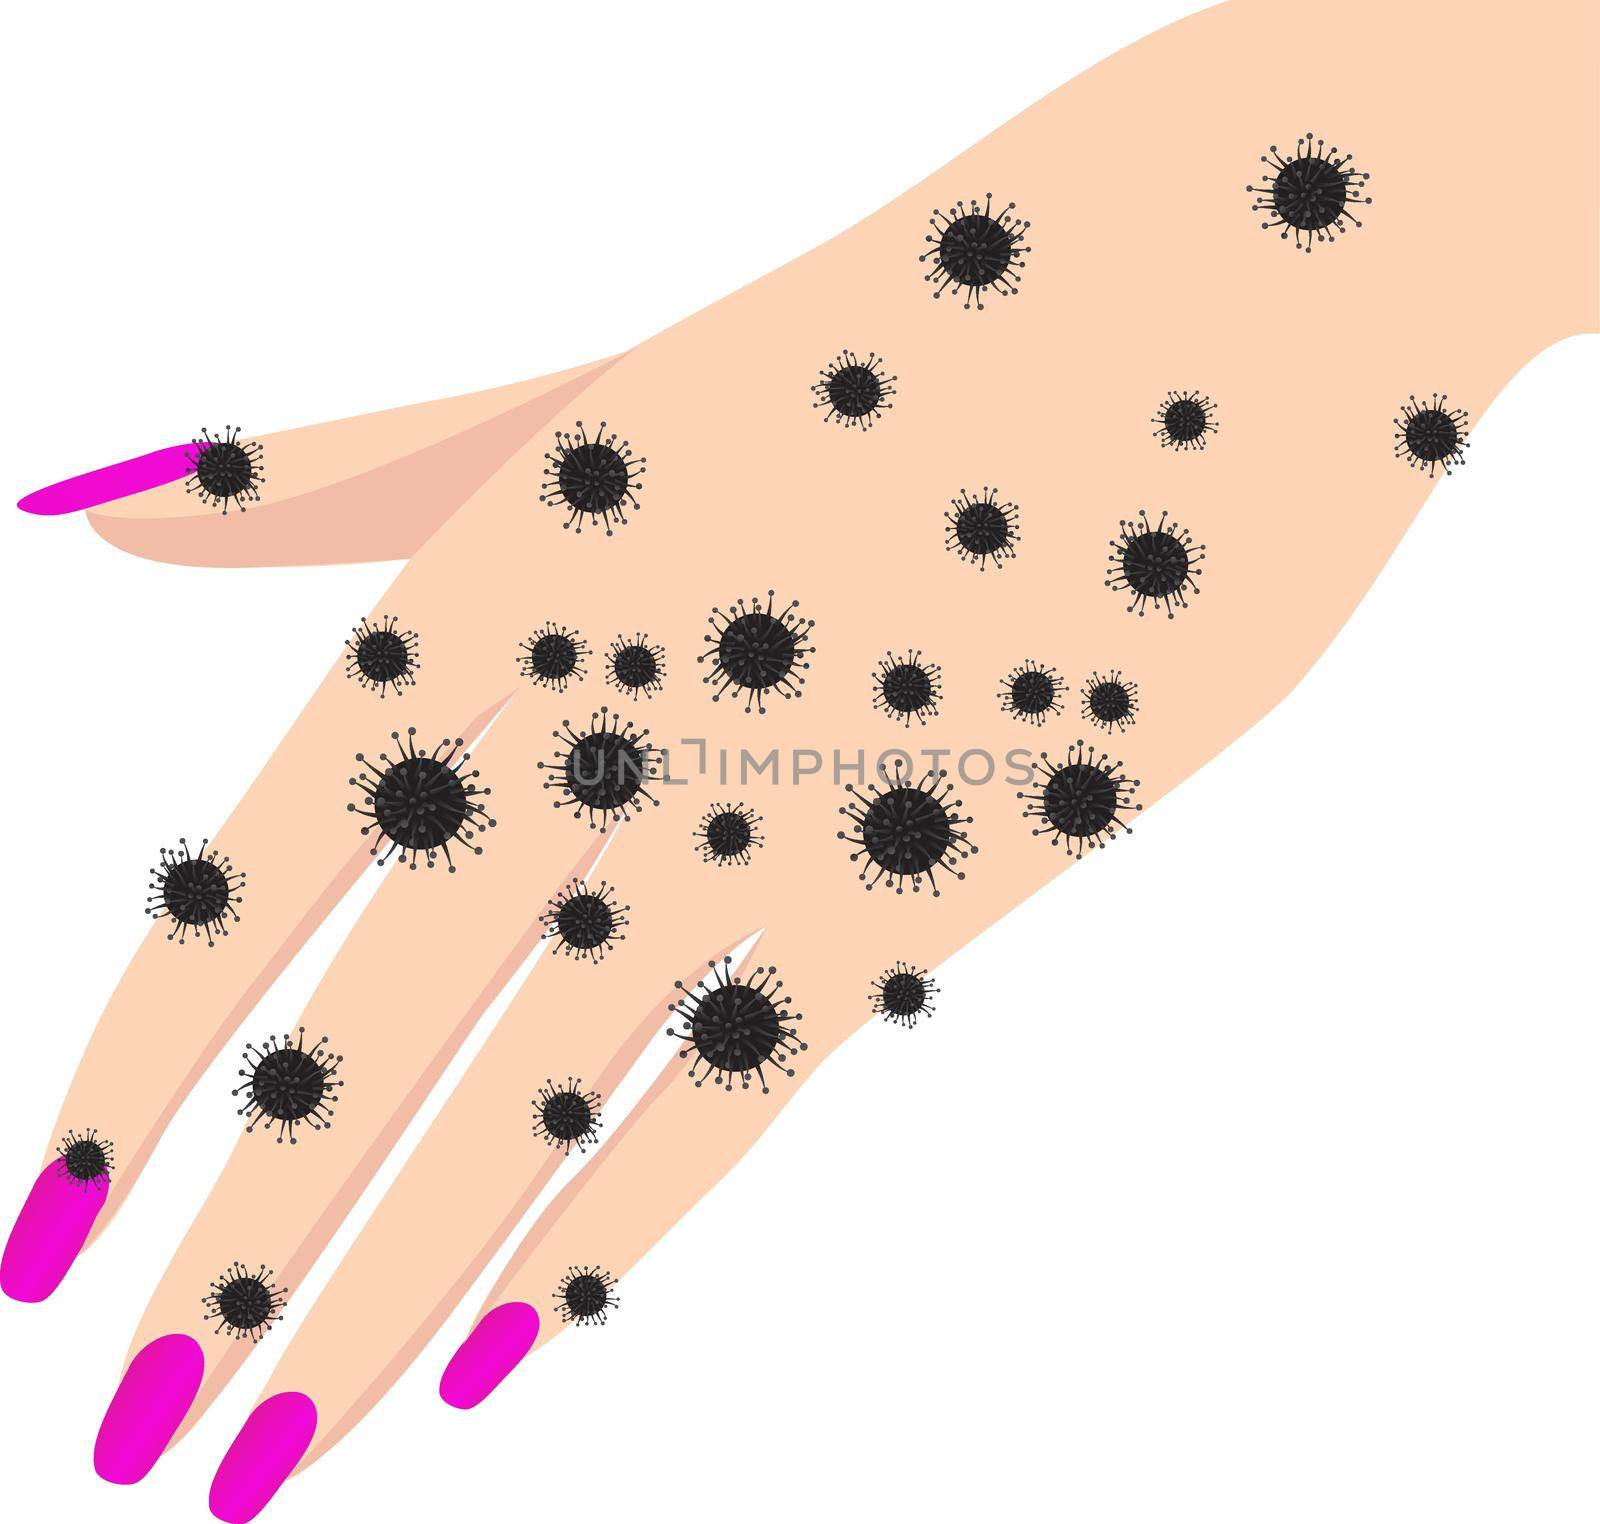 corona virus infection on hands vector illustration by Olena758